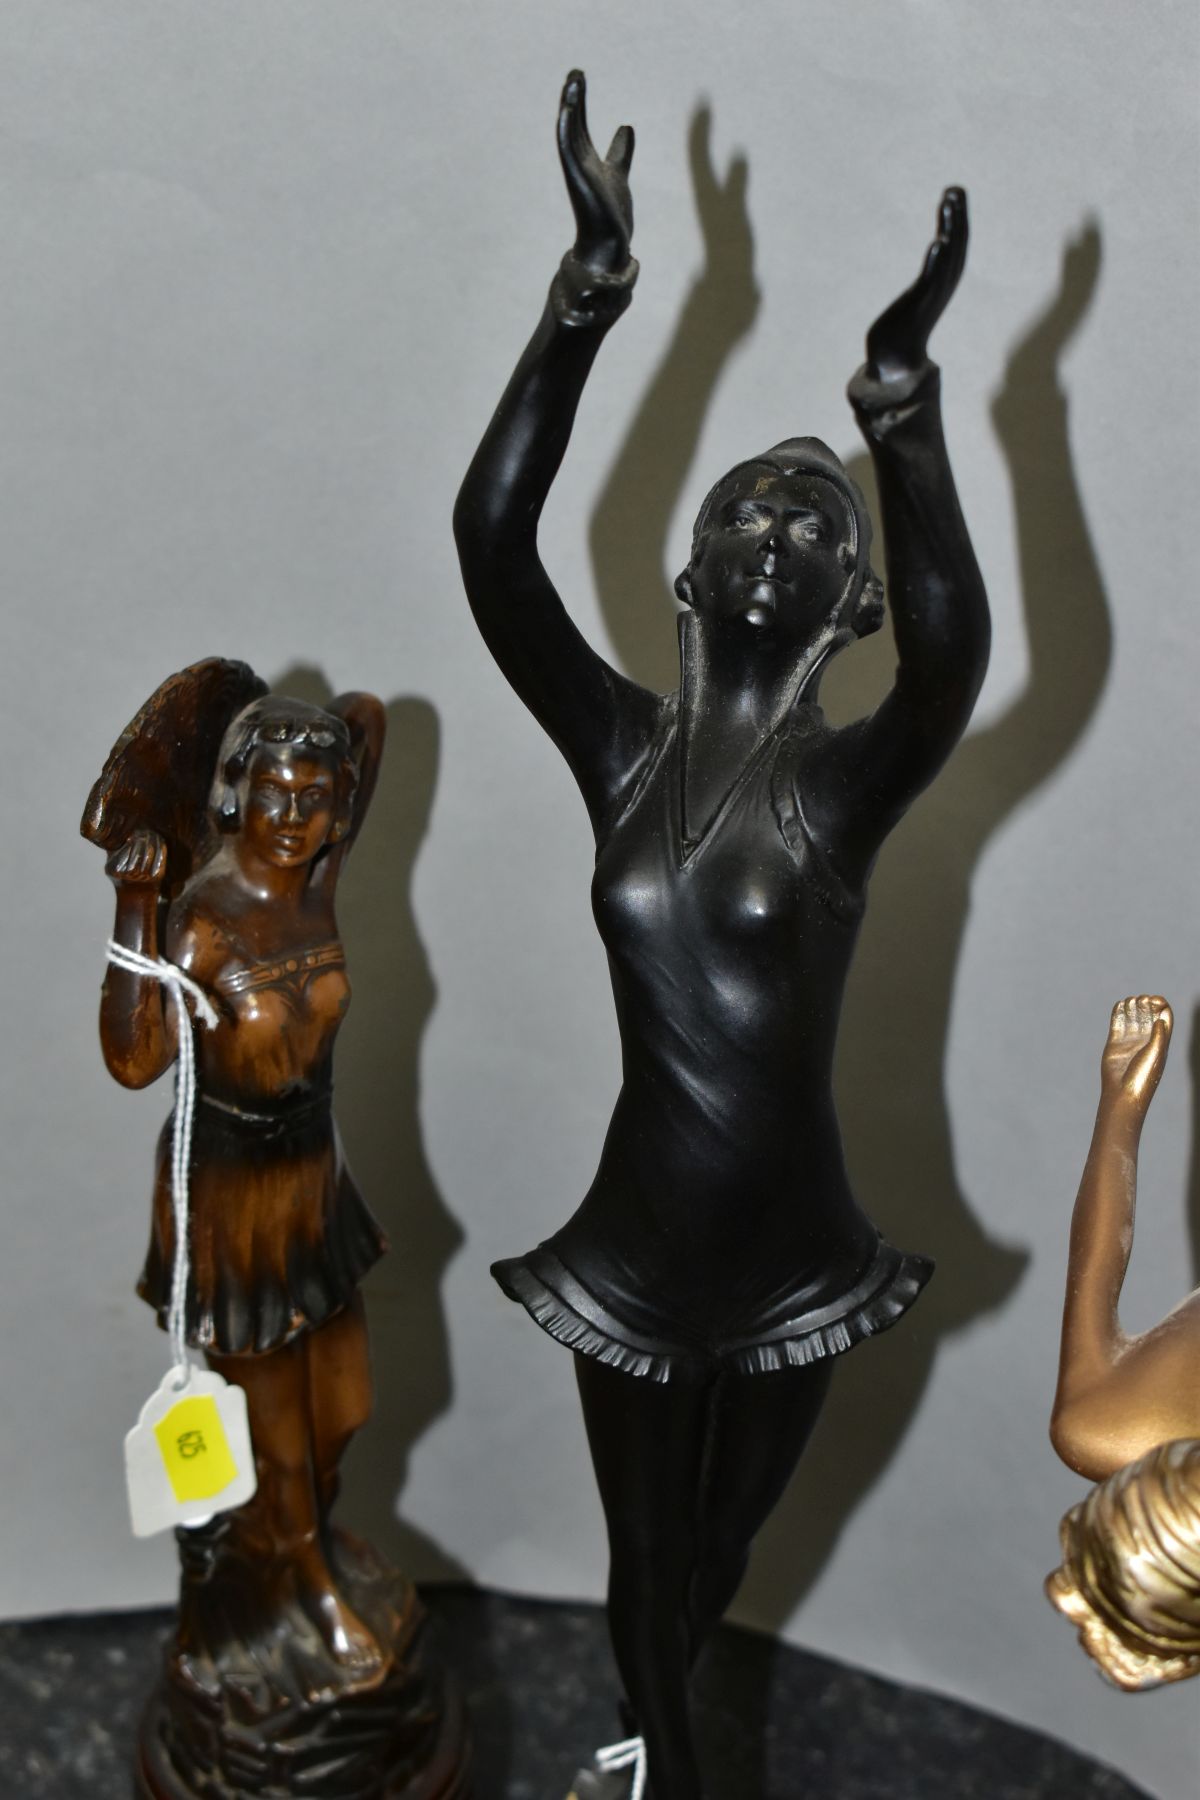 ART DECO STYLE FIGURINES, comprising a bronzed metal scantilly clad female on an onyx plinth, - Image 11 of 11